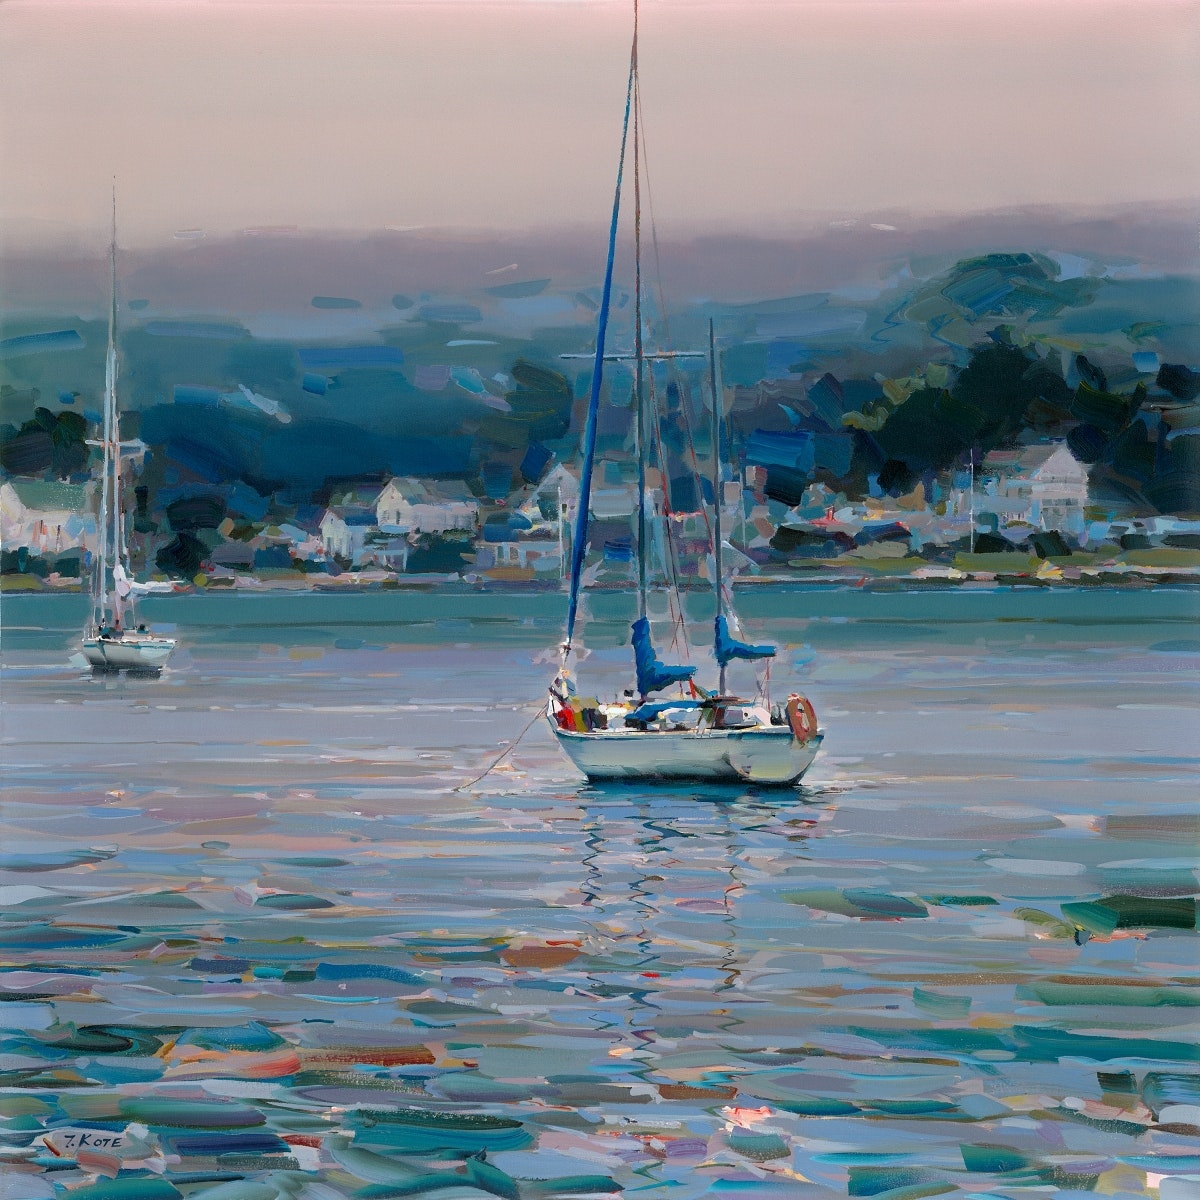 JOSEF KOTE - Across The Water - Acrylic on Canvas - 48x48 inches